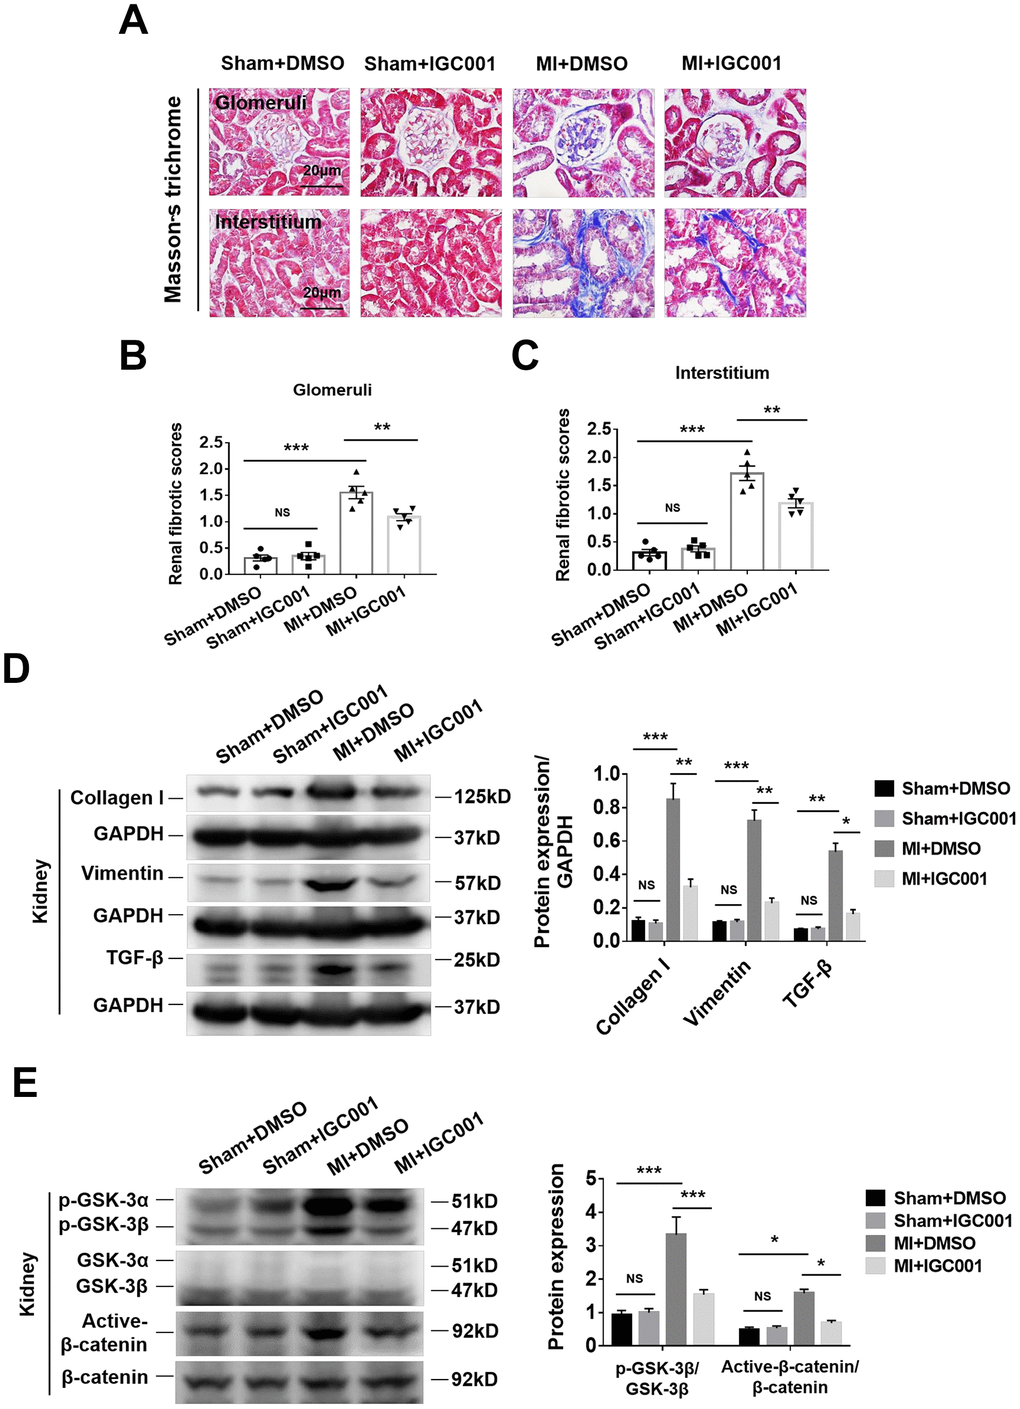 Activation of fibrosis-related signaling pathways can be prohibited by β-catenin inhibitor IGC001 (5 mg/kg/d) in the kidneys at 12 weeks after MI. (A) Representative photomicrographs of renal fibrosis detected by Masson’s trichrome stain in sham mice or CRS mice treatment with IGC001 or DMSO. Semi-quantitative assessment of glomerular fibrosis (B) and interstitial fibrosis (C). **P ***P D) Western blot of collagen I, vimentin and TGF- β. (E) Western blot of p-GSK-3β and active-β-catenin. *P **P ***P 